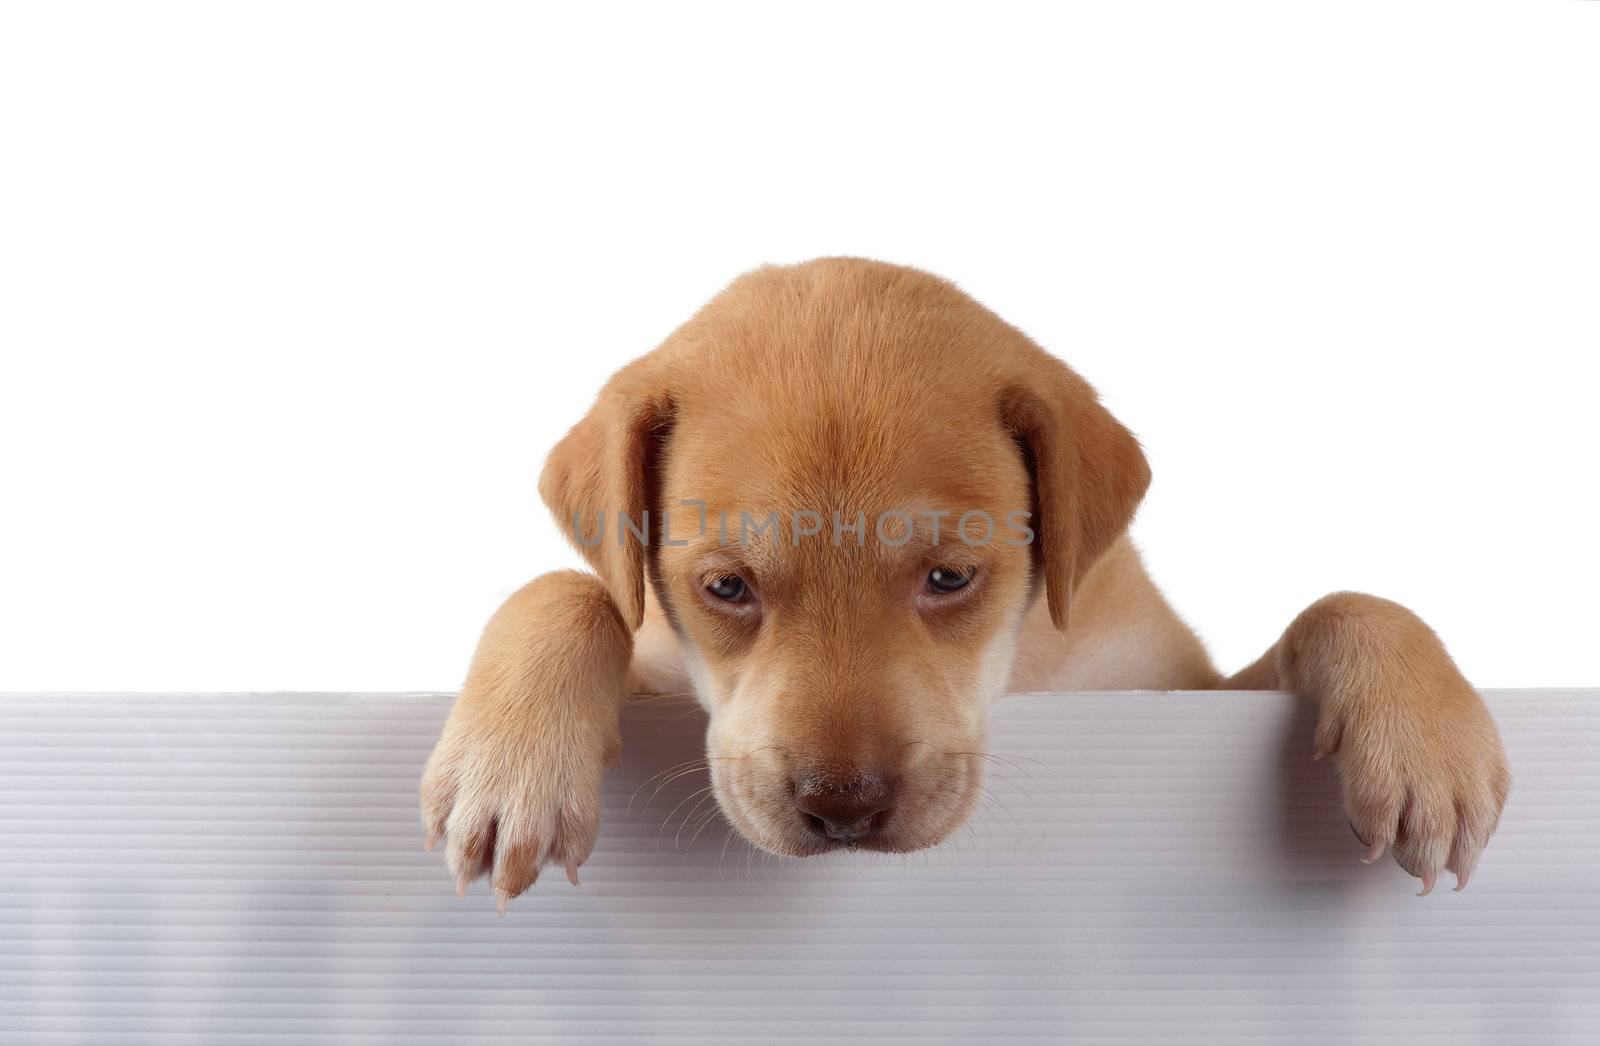 A puppy appears pensive with his paws on a white fence.